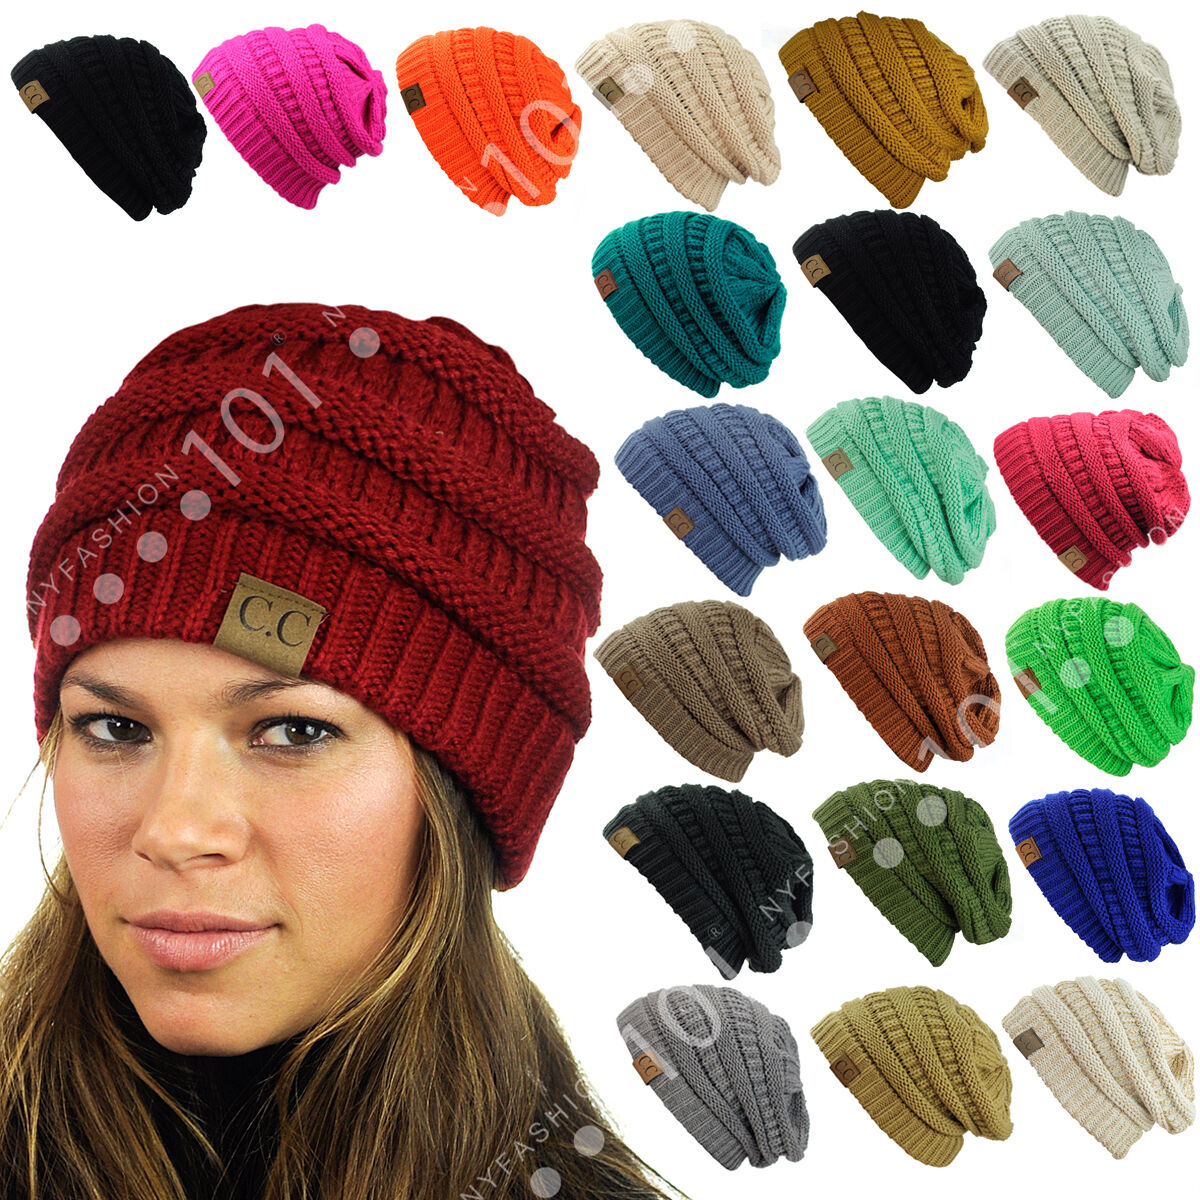 Hot Item! Cc Beanie New Women's Knit Slouchy Thick Cap Hat Unisex Solid Color